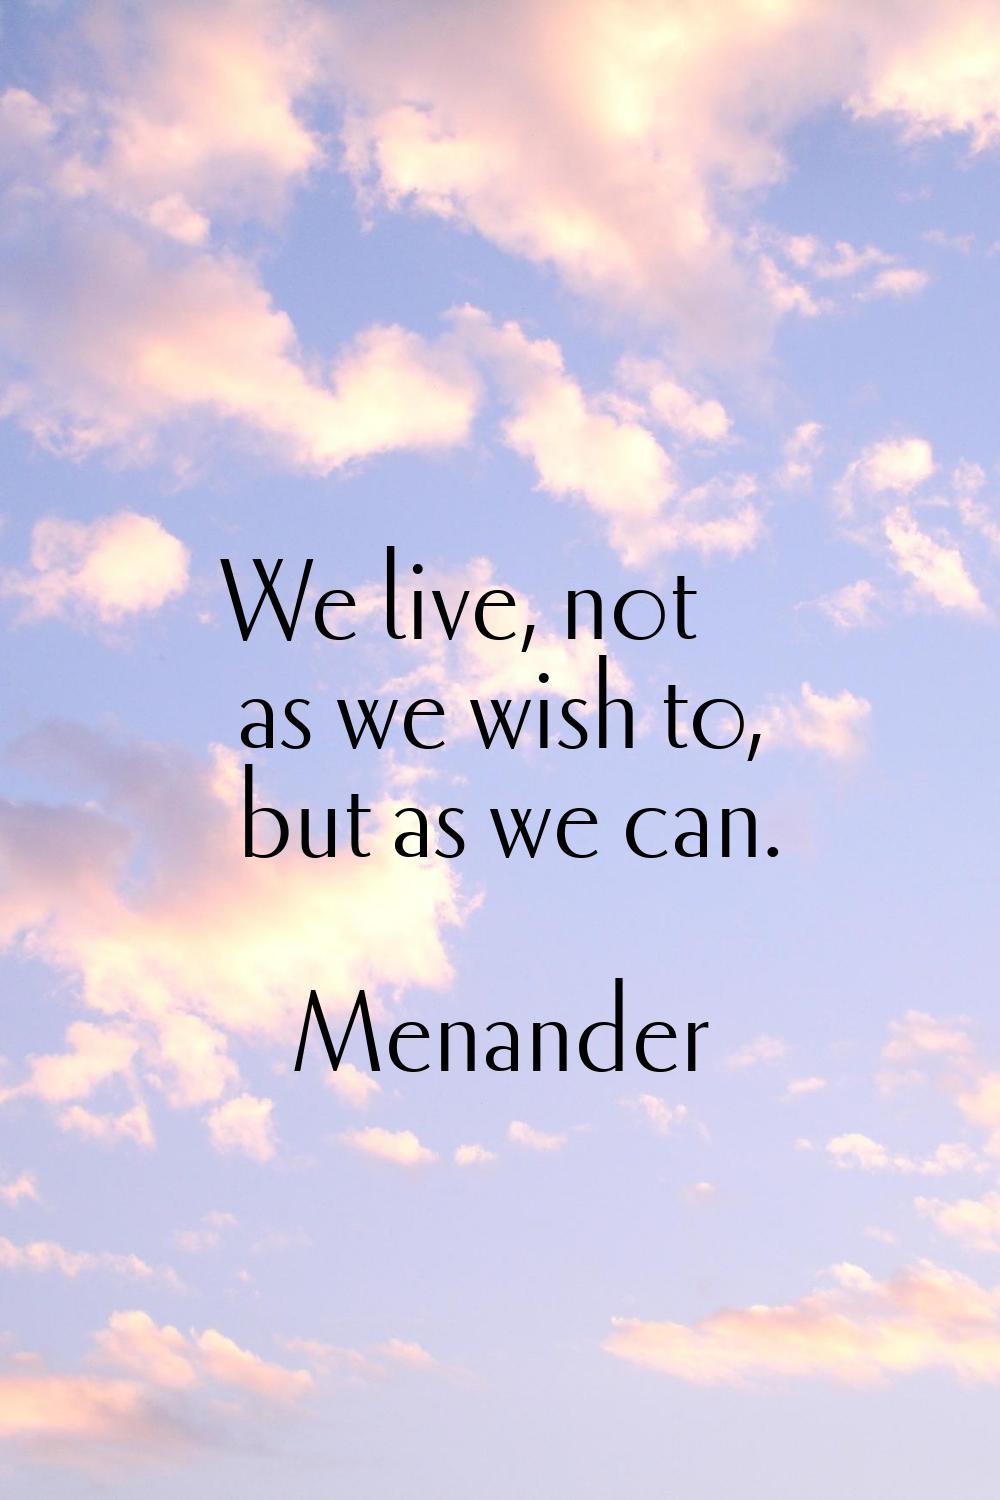 We live, not as we wish to, but as we can.